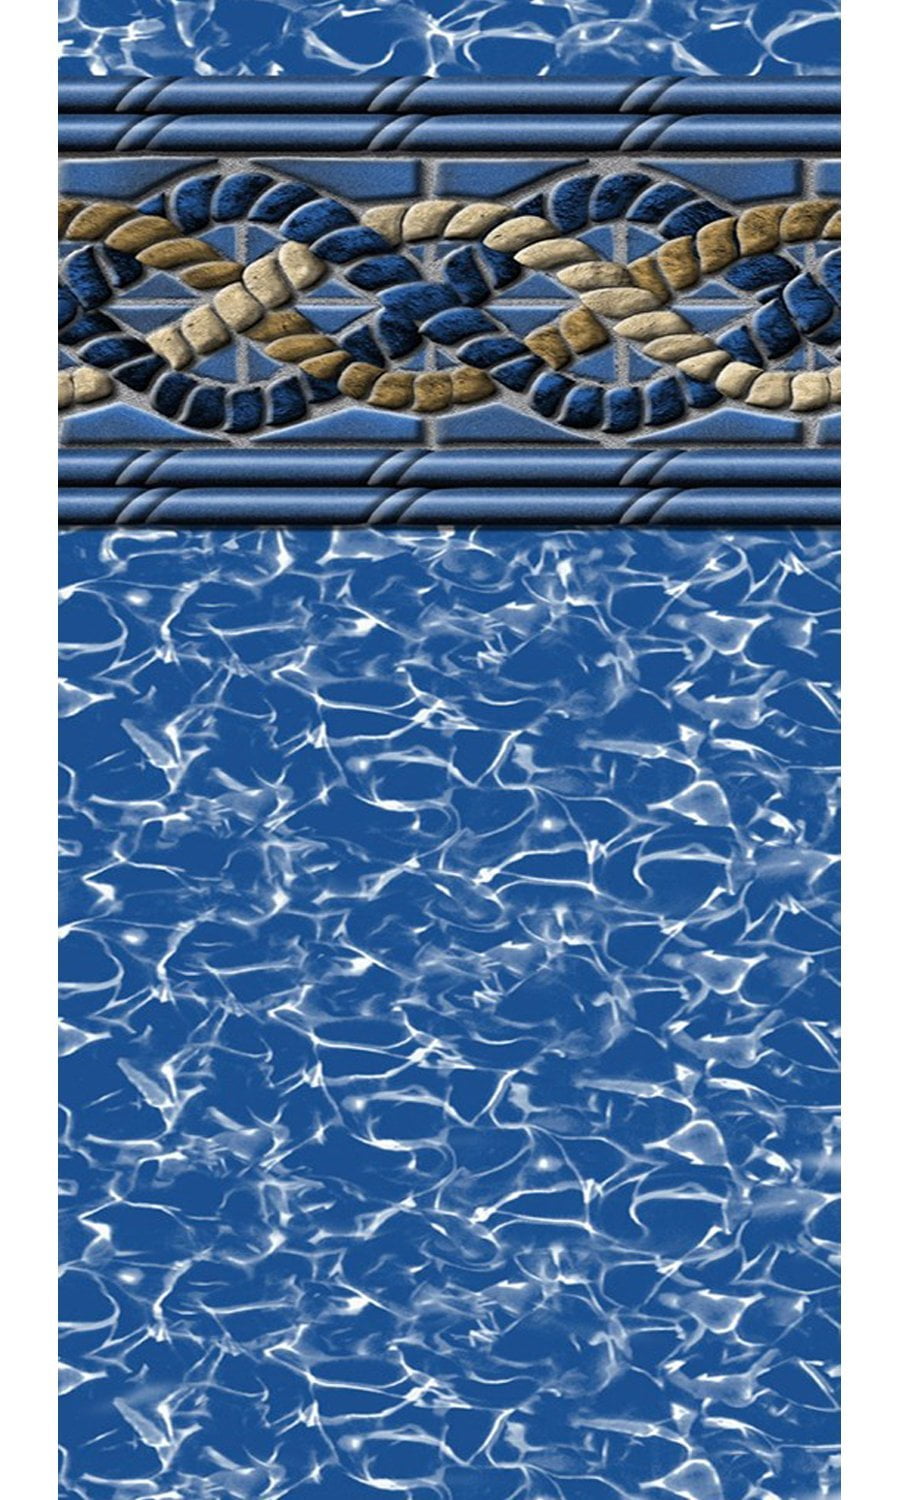 12x20 rectangle pool liner